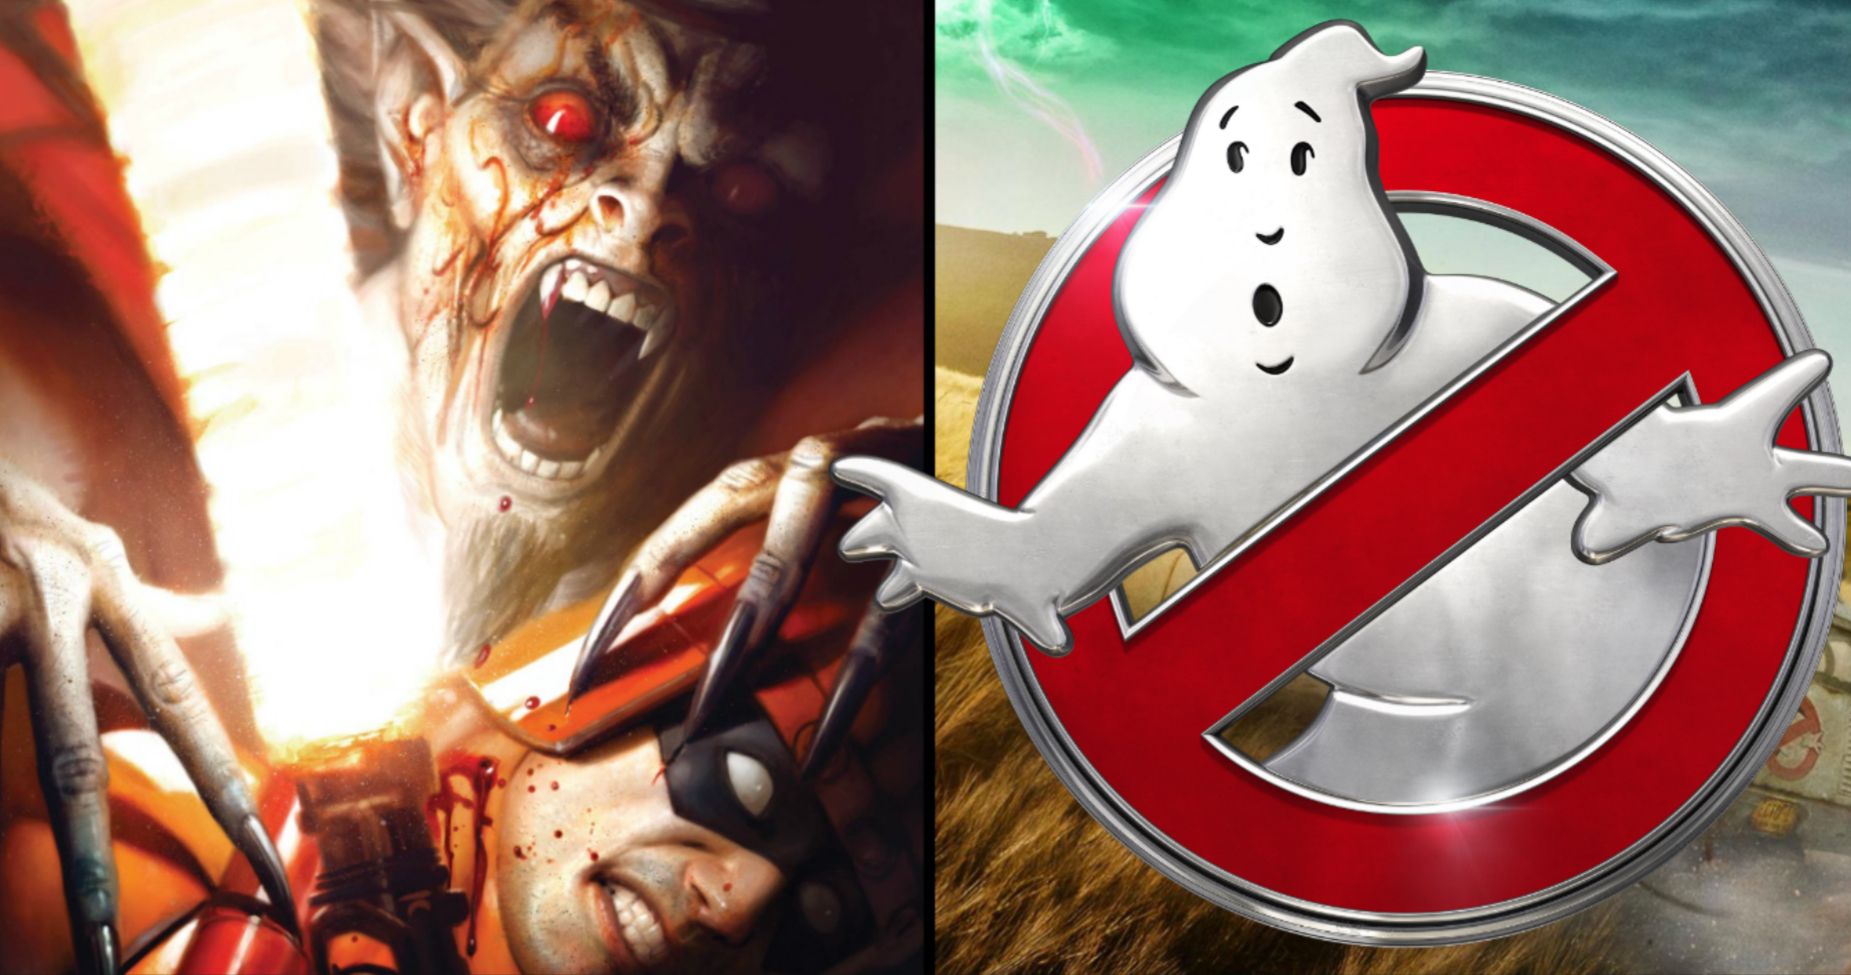 Ghostbusters: Afterlife and Morbius Get Delayed Until 2021